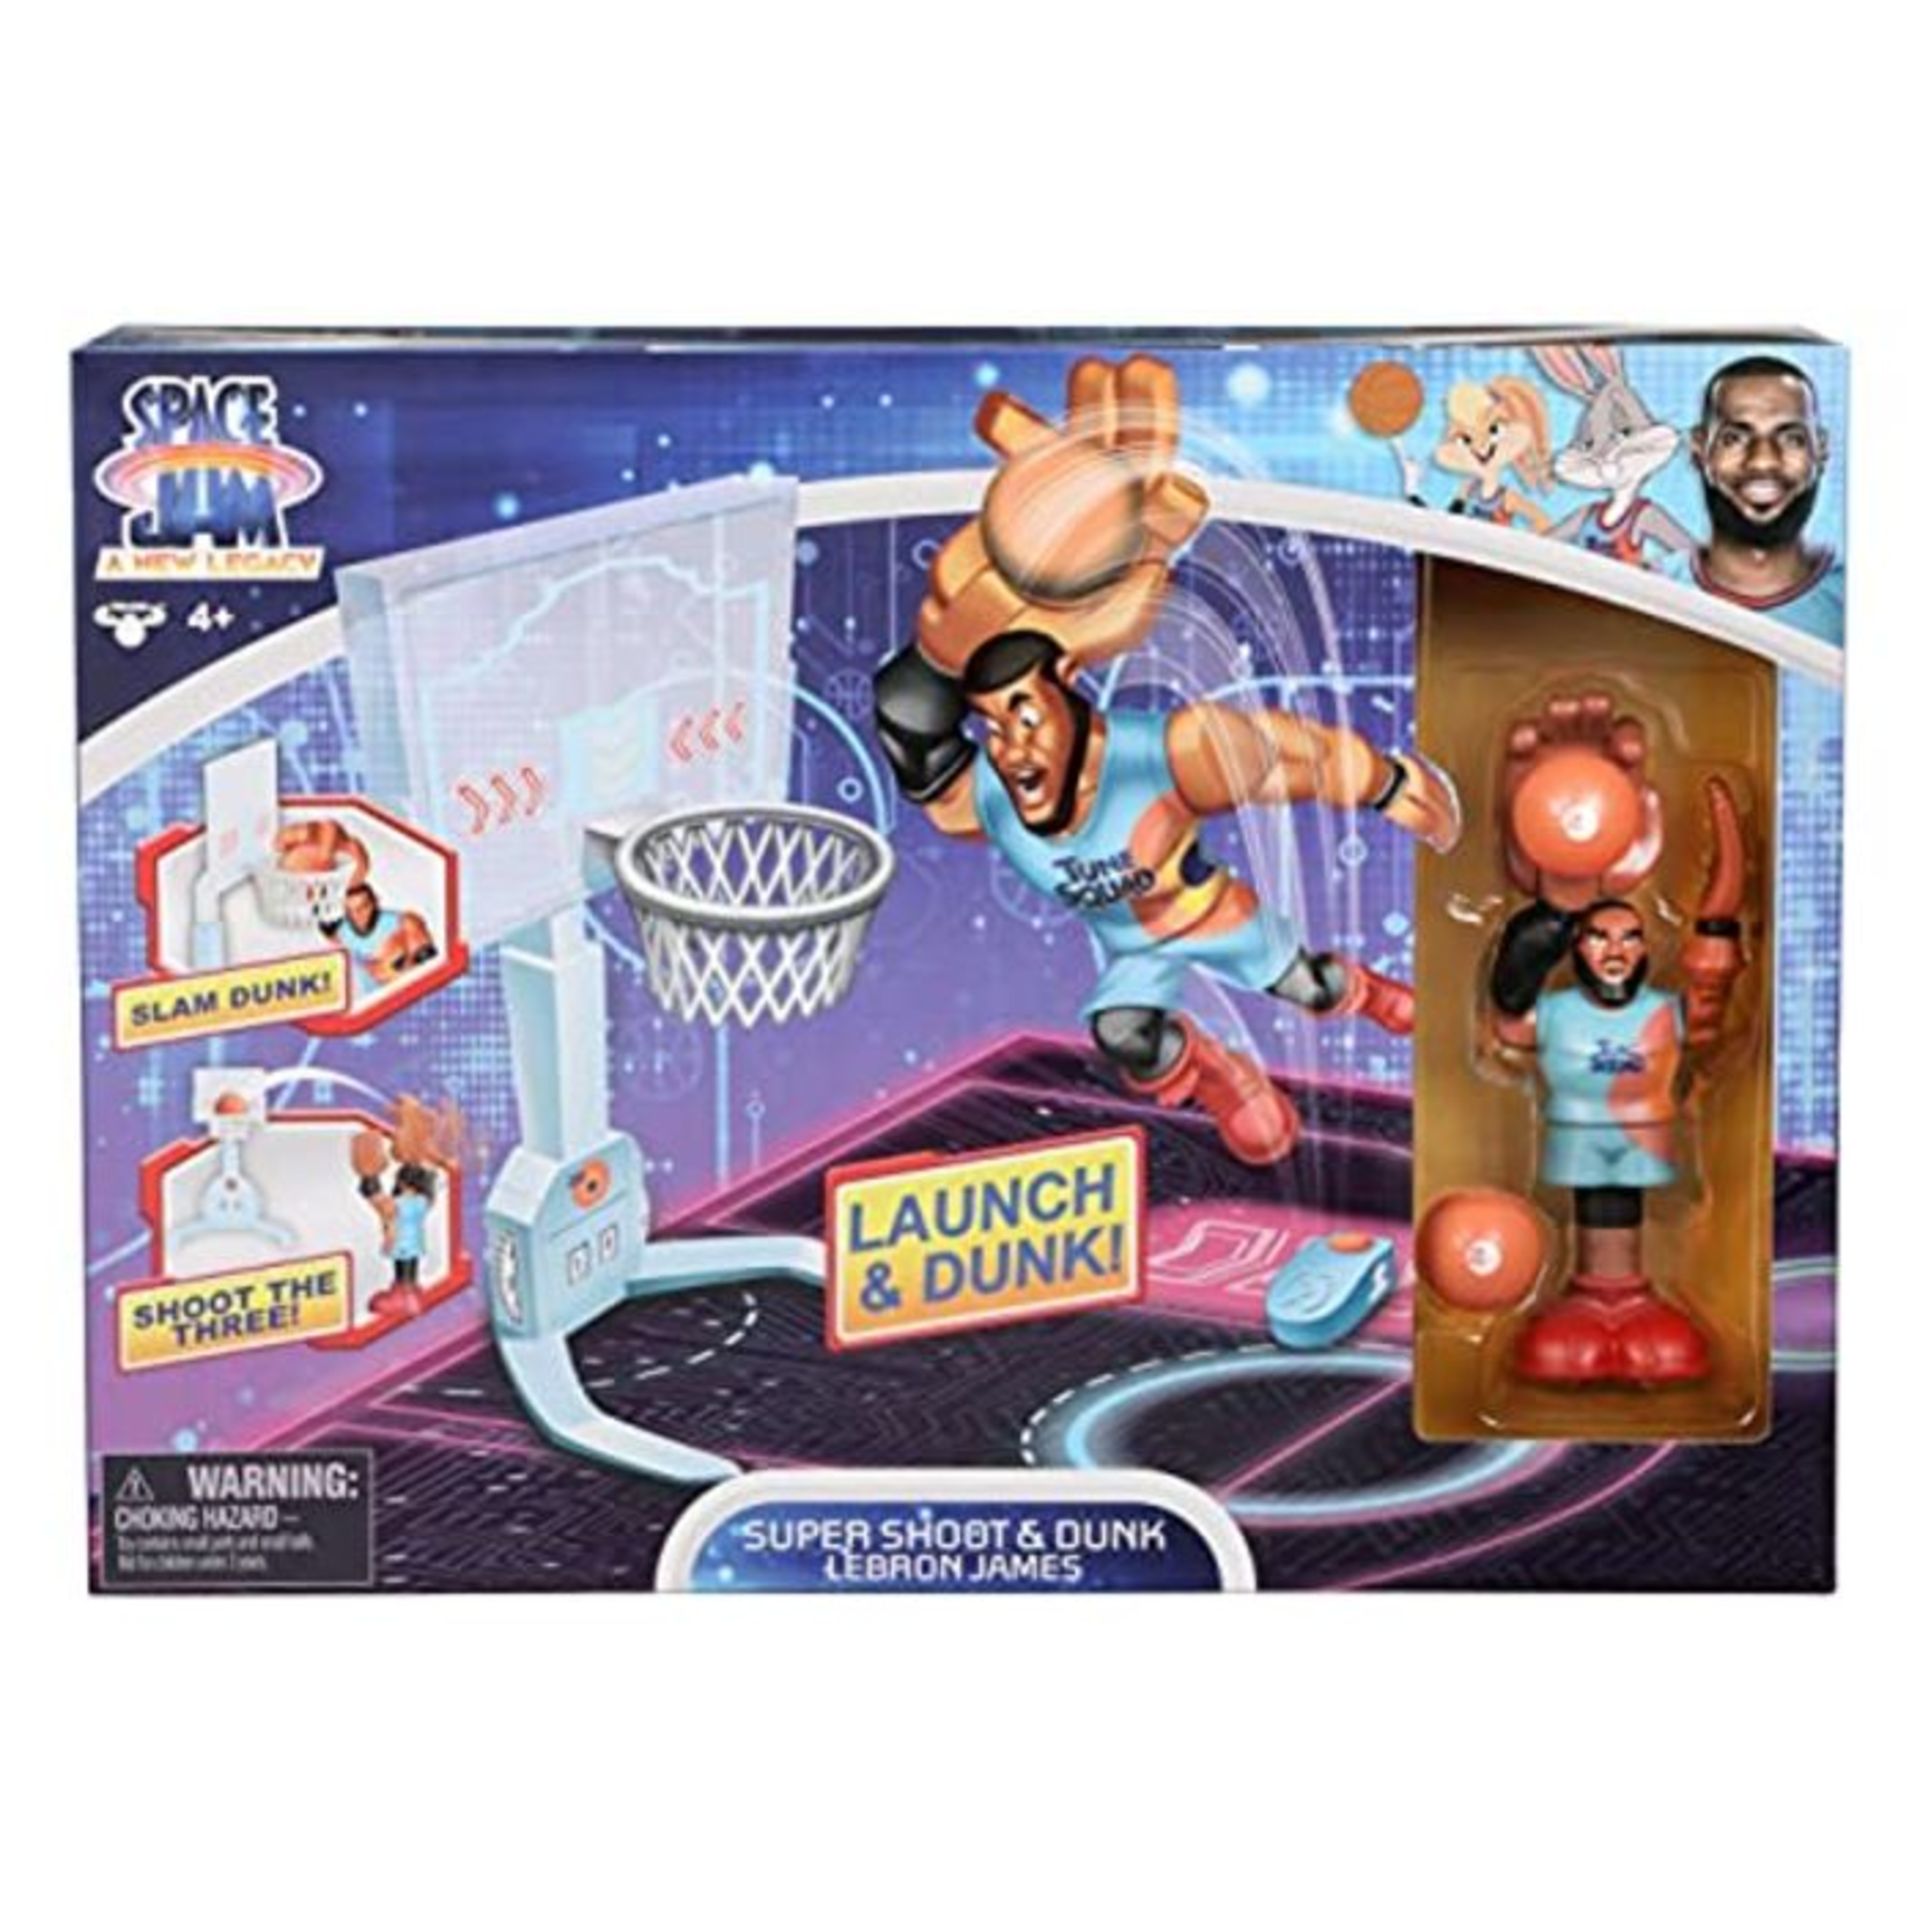 [INCOMPLETE] Space Jam 2: A New Legacy Official Collectable Dunks Playset: Including 2